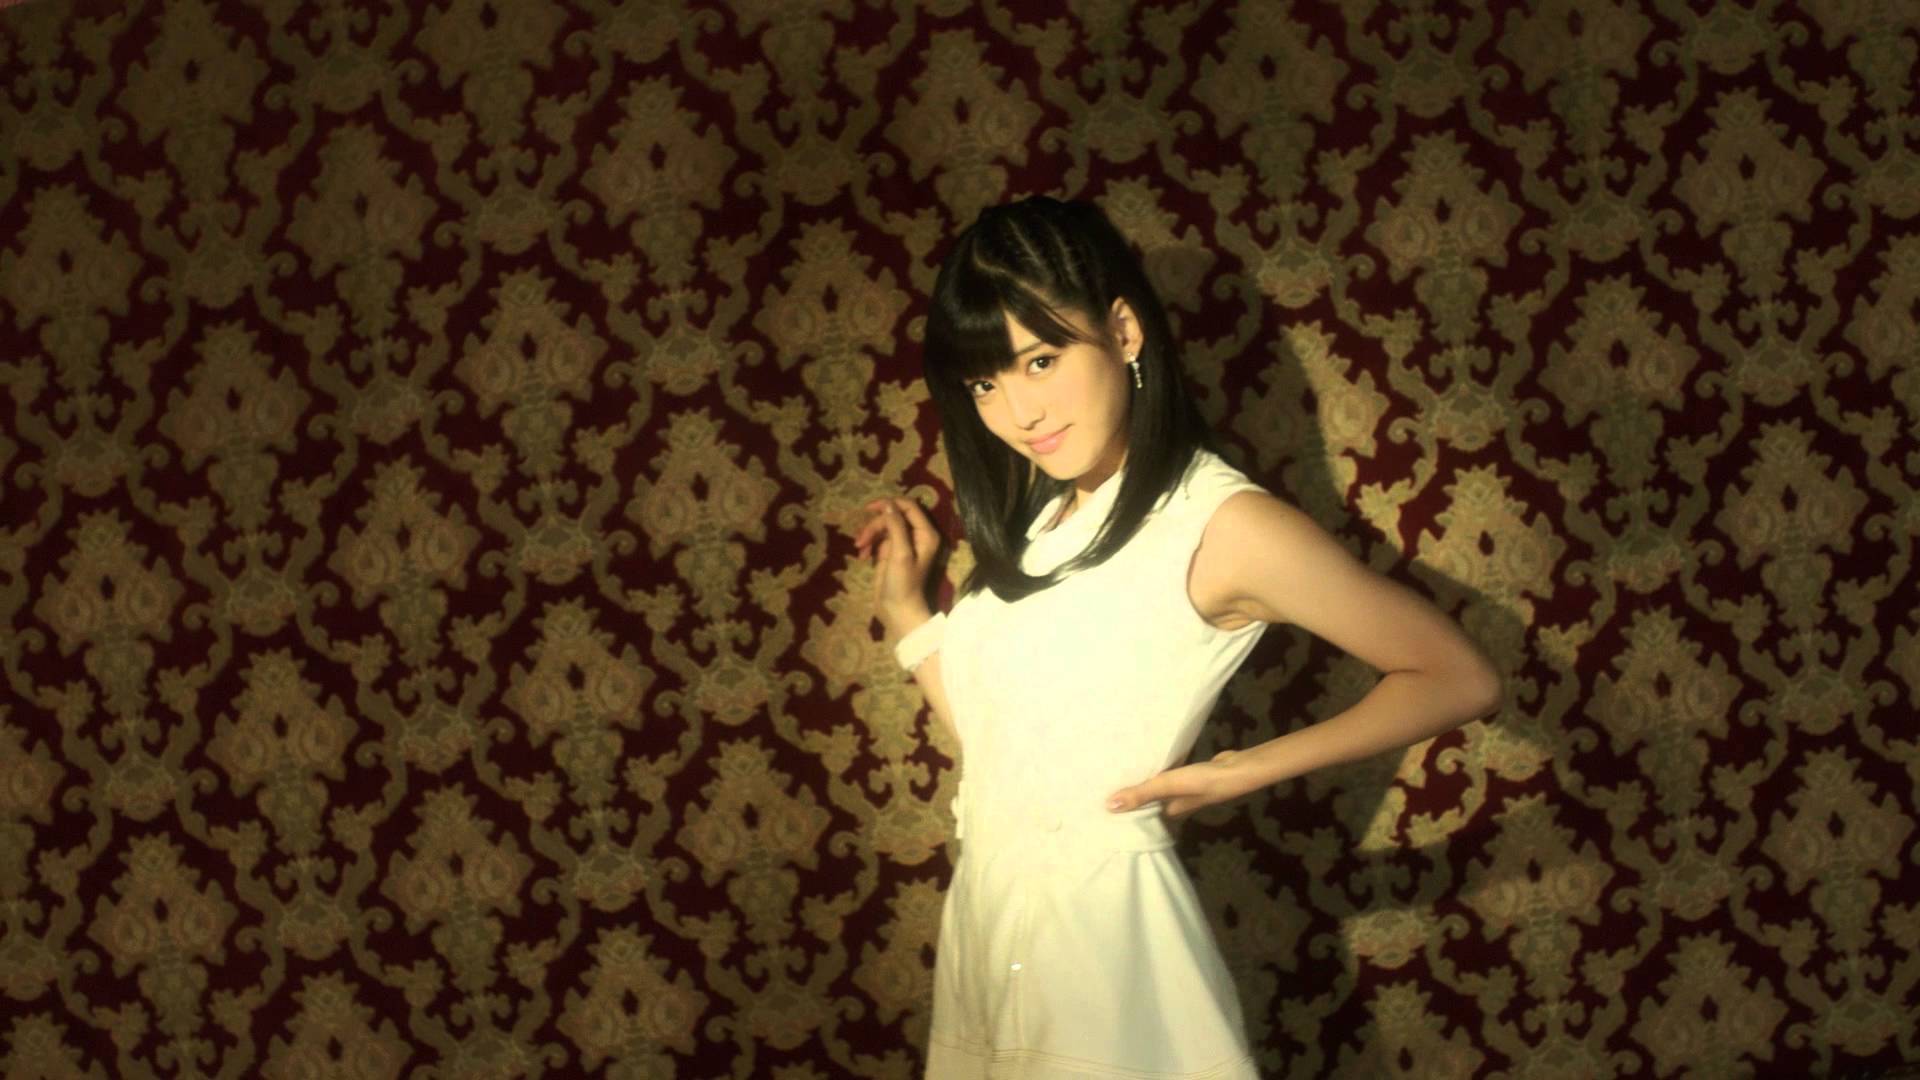 Kanon Suzuki is Back!  Morning Musume ’15 Releases MV for New Single “Oh my wish!”